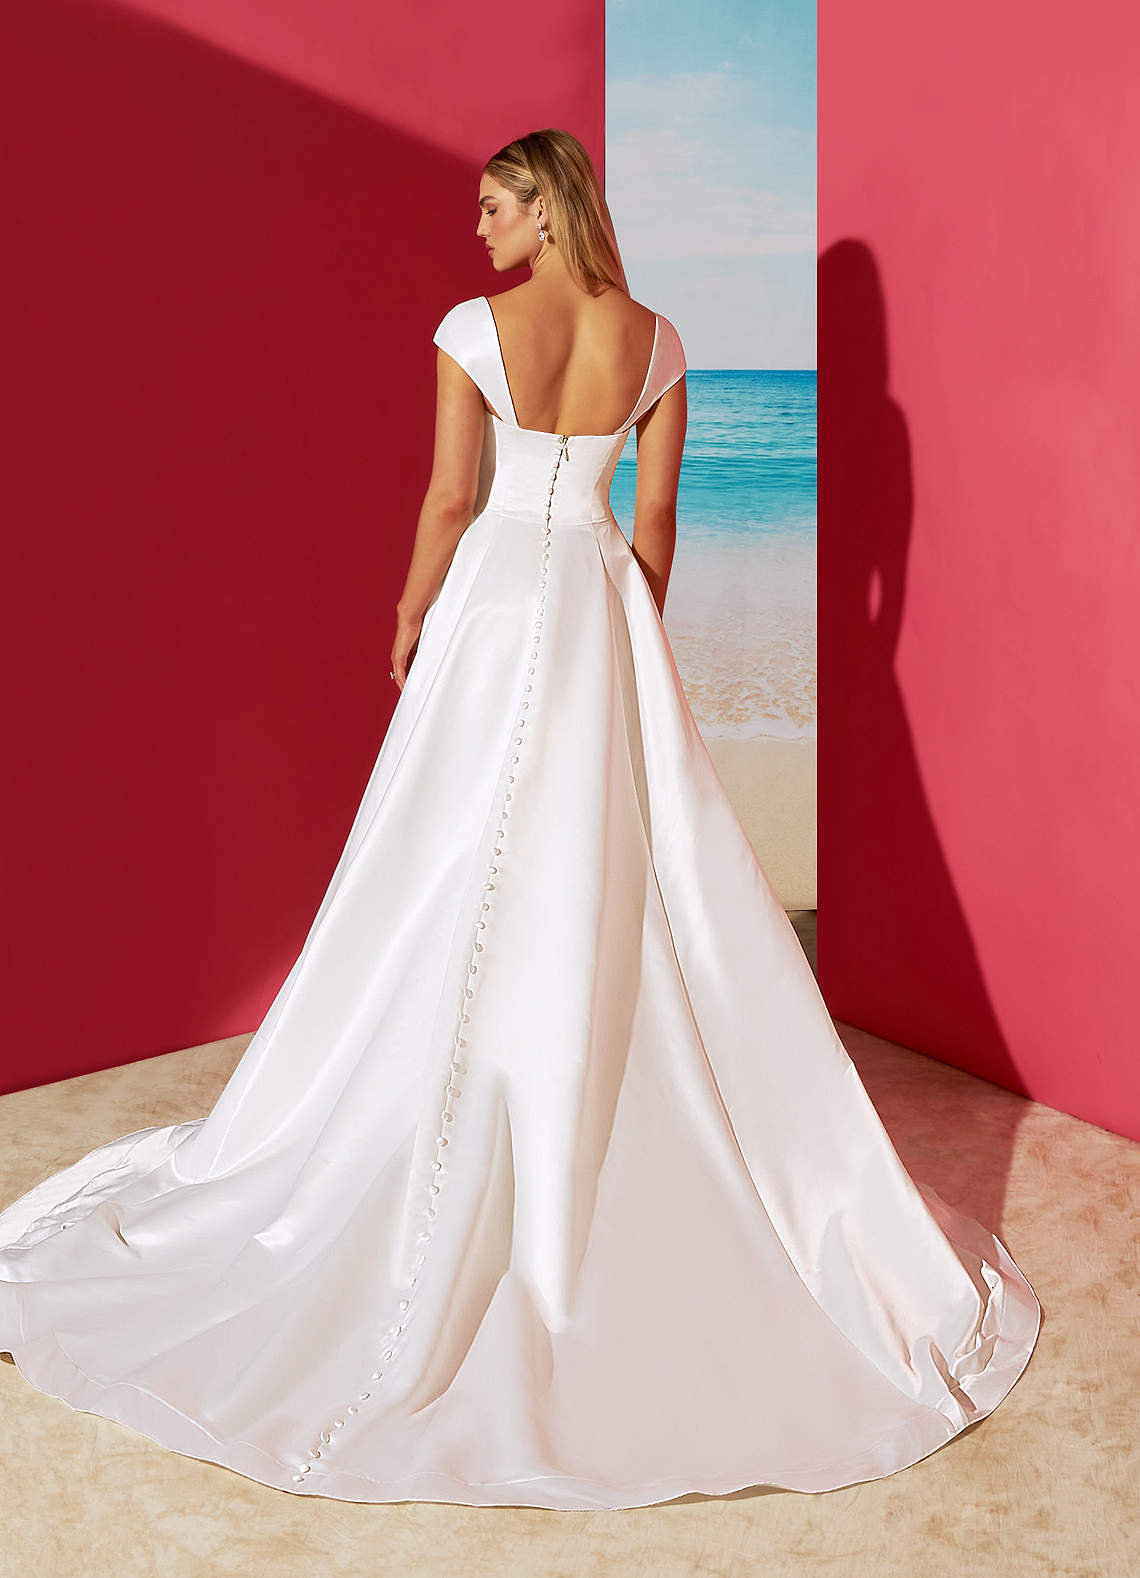 Azazie Luxia Wedding Dresses A-Line Sweetheart Neckline Matte Satin Cathedral Train Dress image1